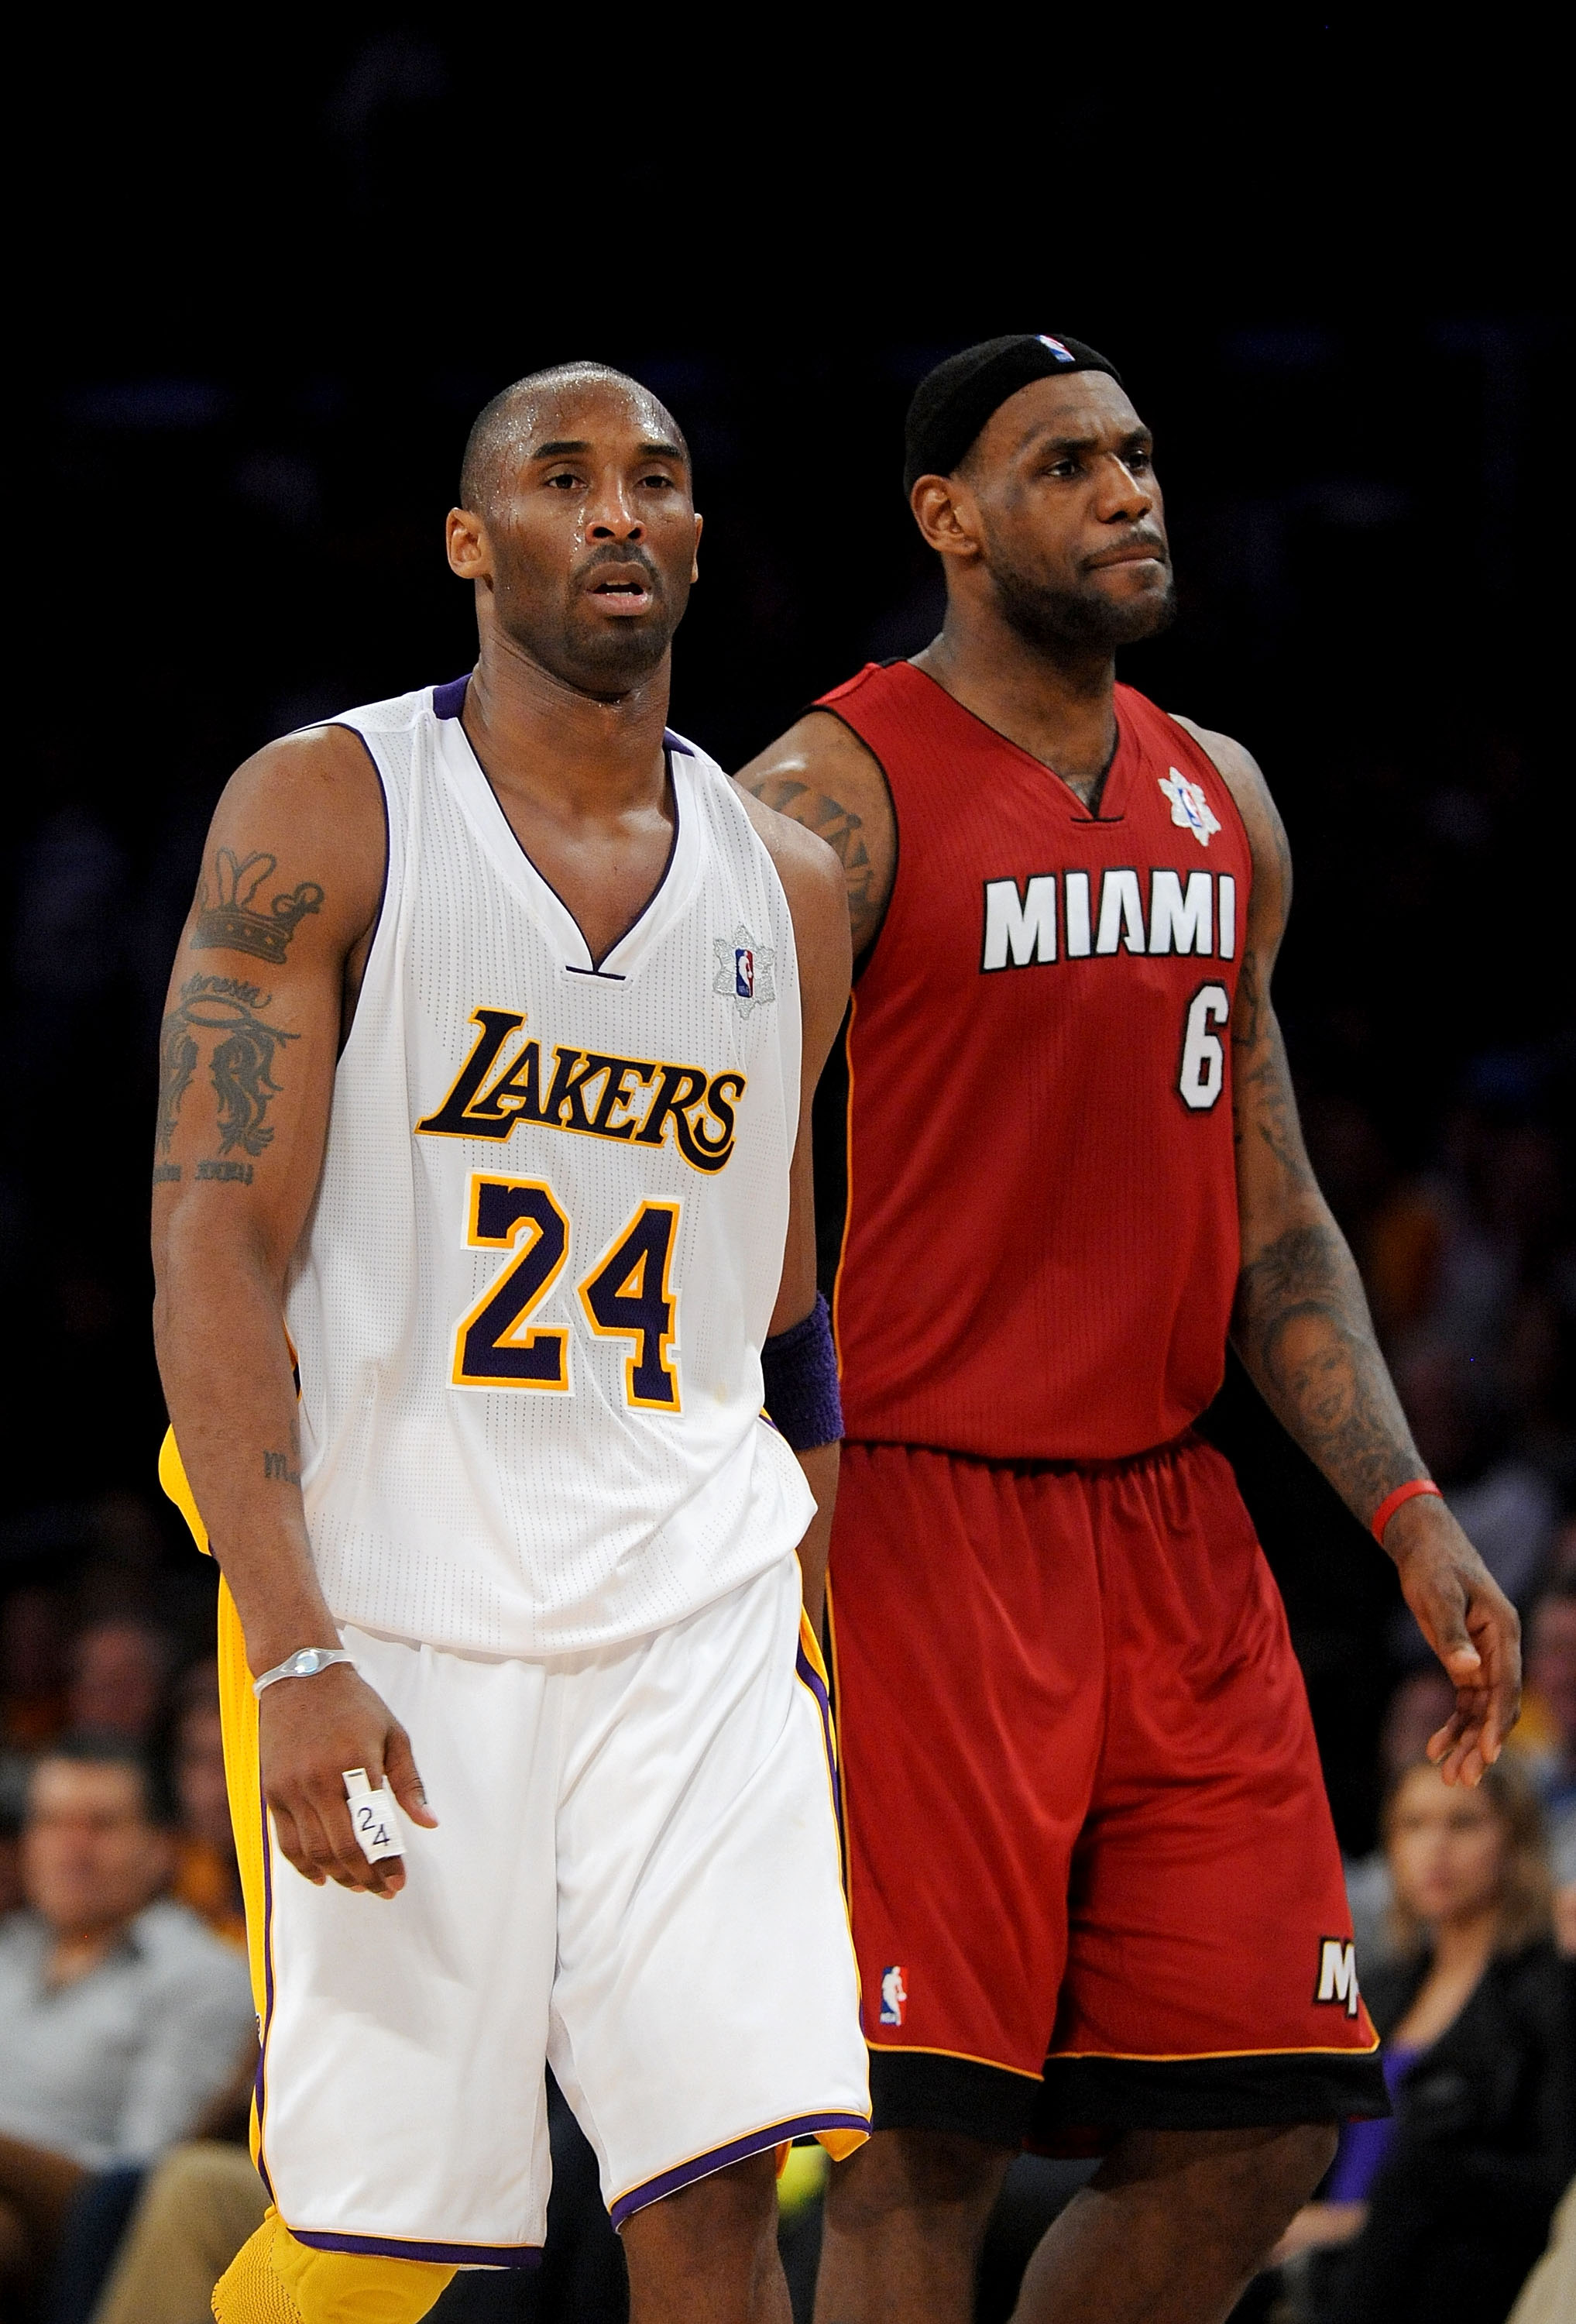 LOS ANGELES, CA - DECEMBER 25:  (L-R) Kobe Bryant #24 of the Los Angeles Lakers and LeBron James #6 of the Miami Heat walk upcourt during the game at Staples Center on December 25, 2010 in Los Angeles, California. NOTE TO USER: User expressly acknowledges